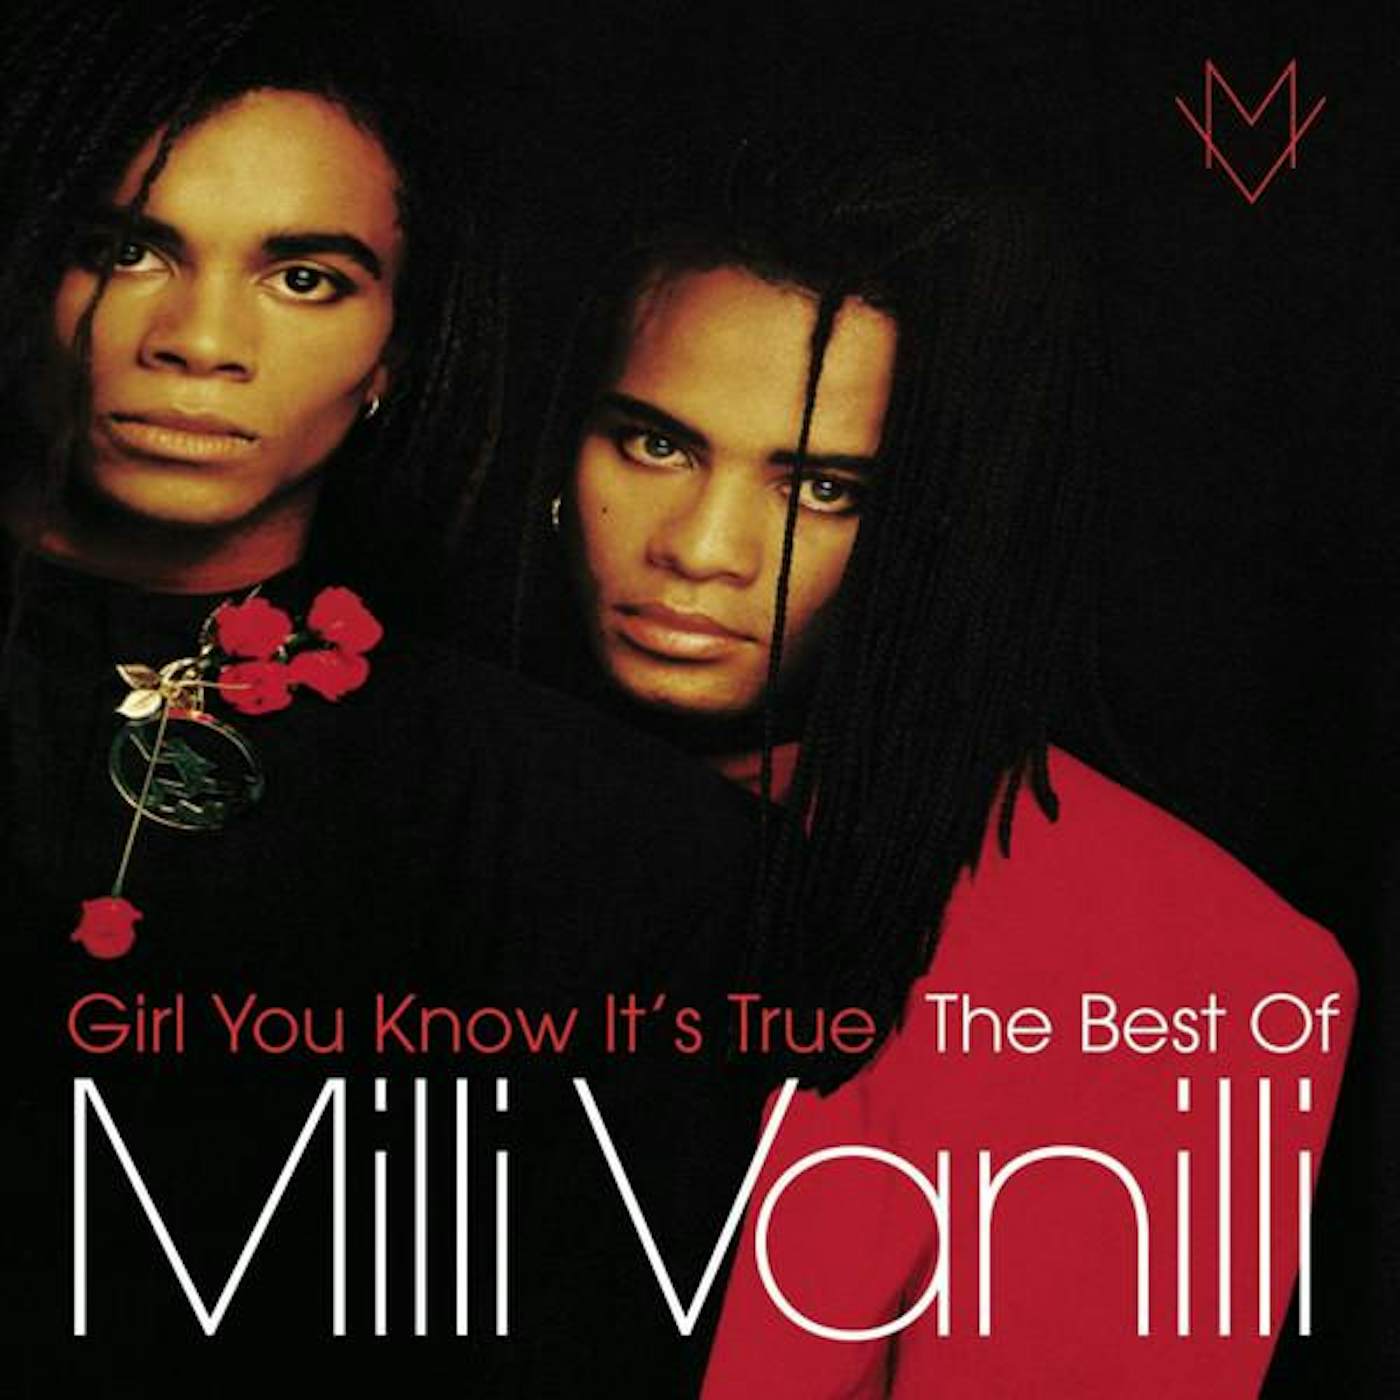 GIRL YOU KNOW IT'S TRUE: THE BEST OF MILLI VANILLI CD